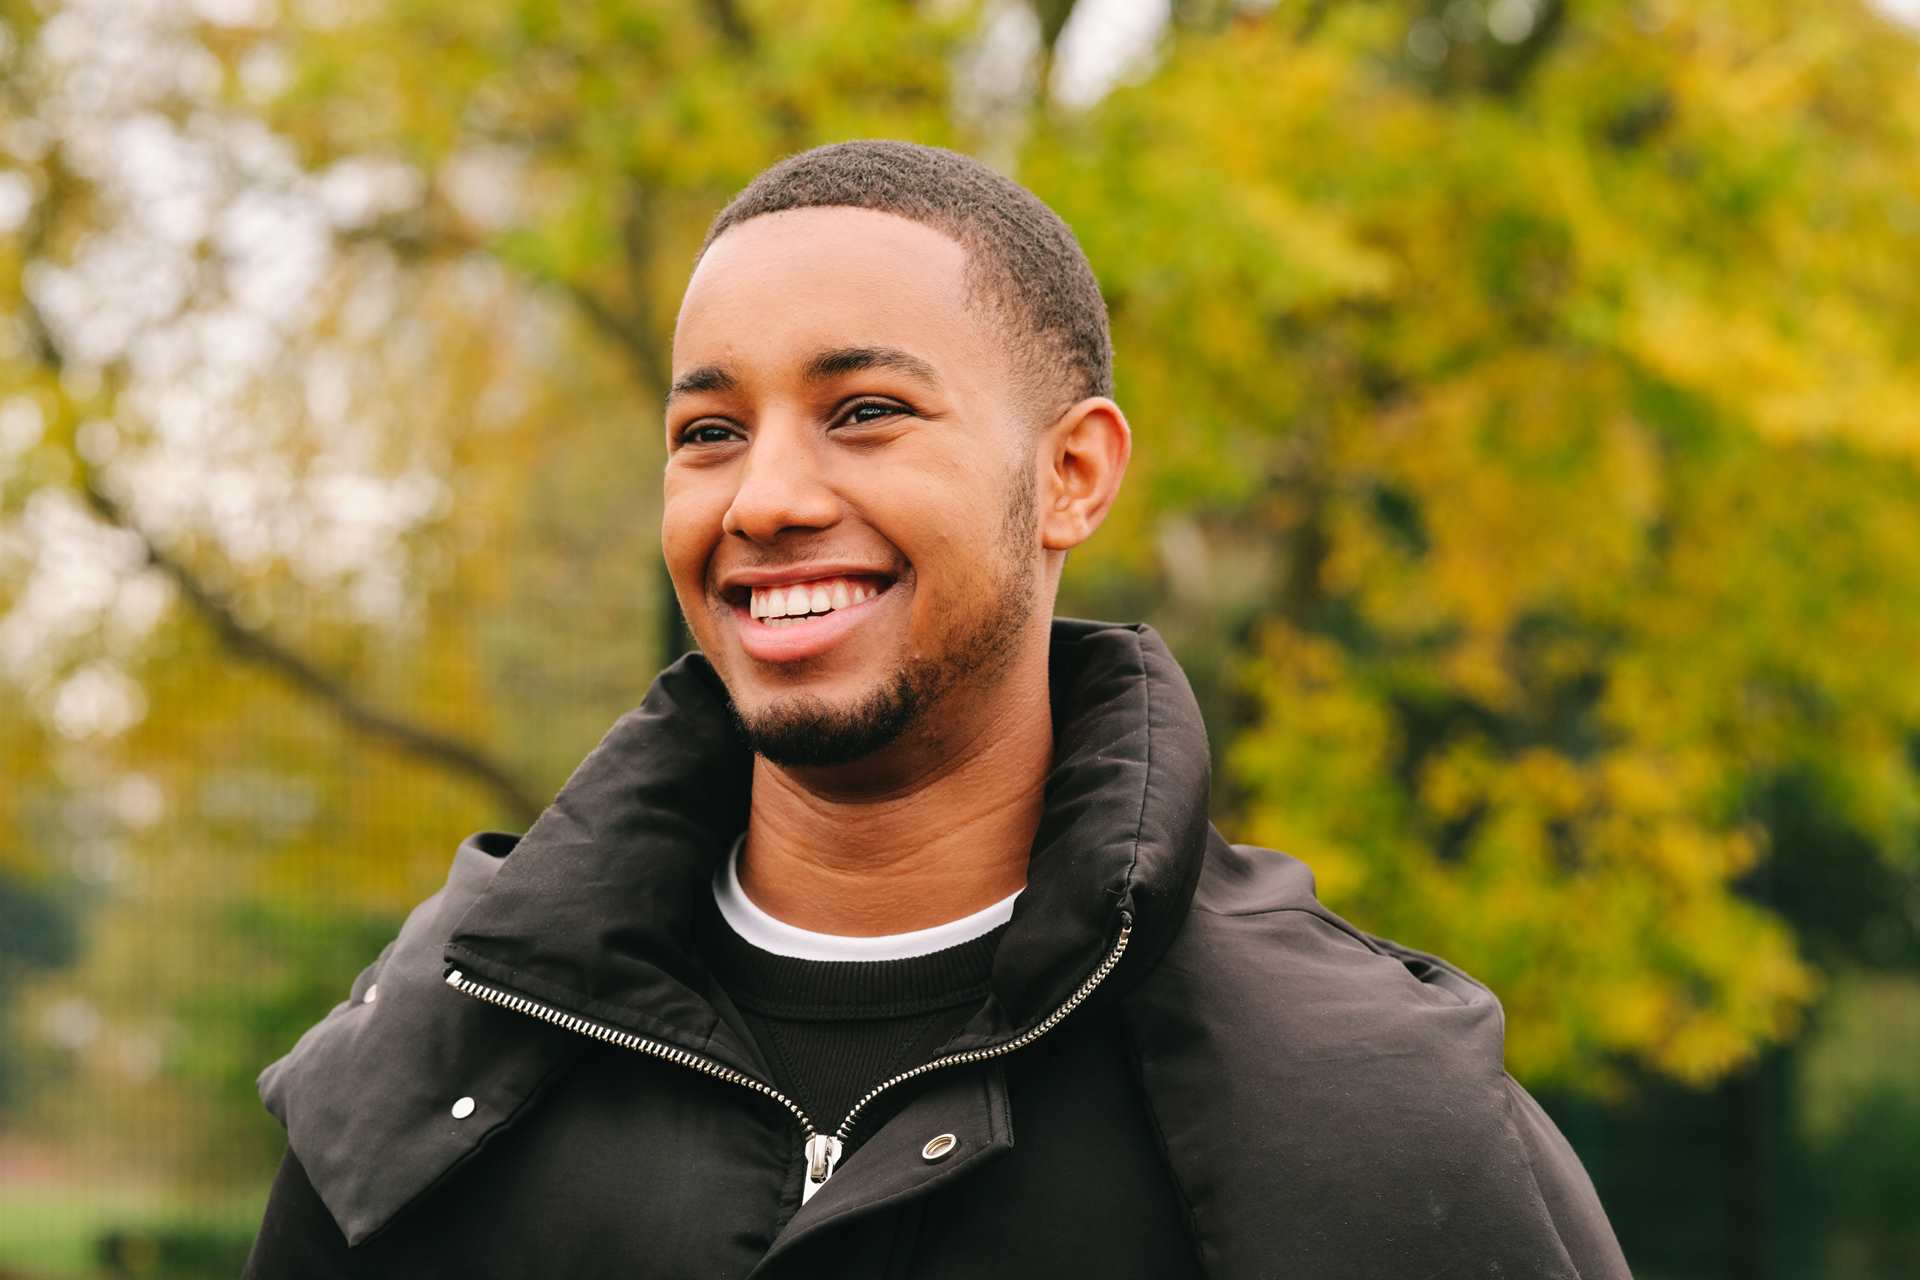 A young Black man smiling in the park.